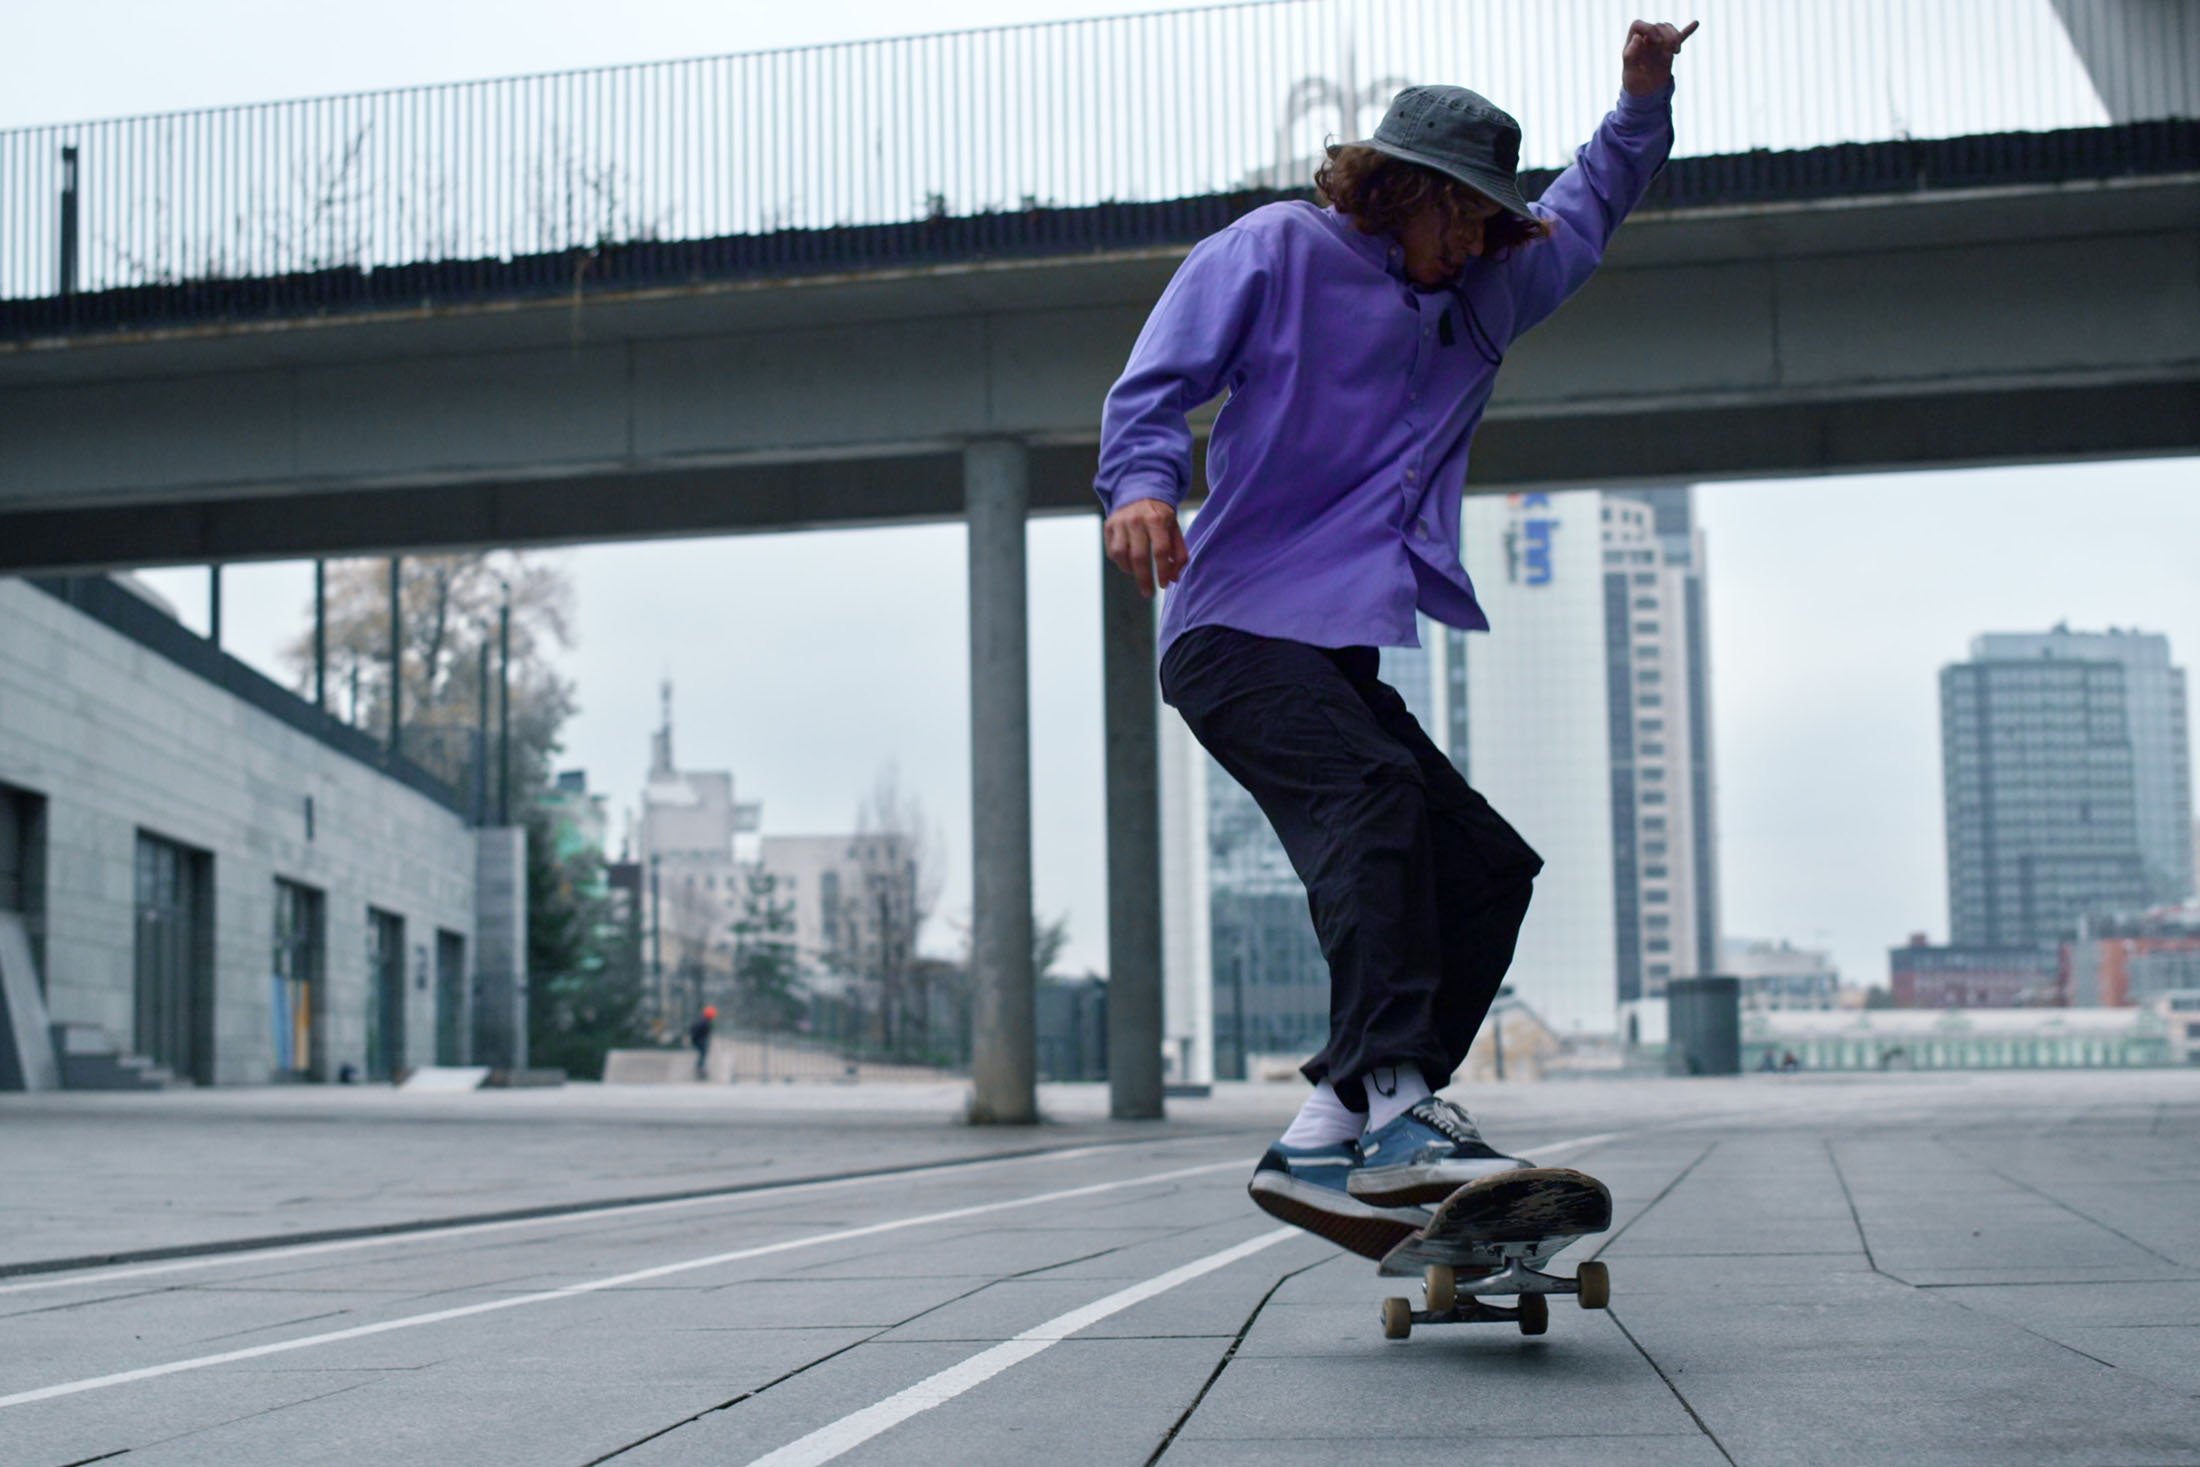 The sport of skateboarding has become a huge industry, economy and culture worldwide. (Shutterstock Photo)